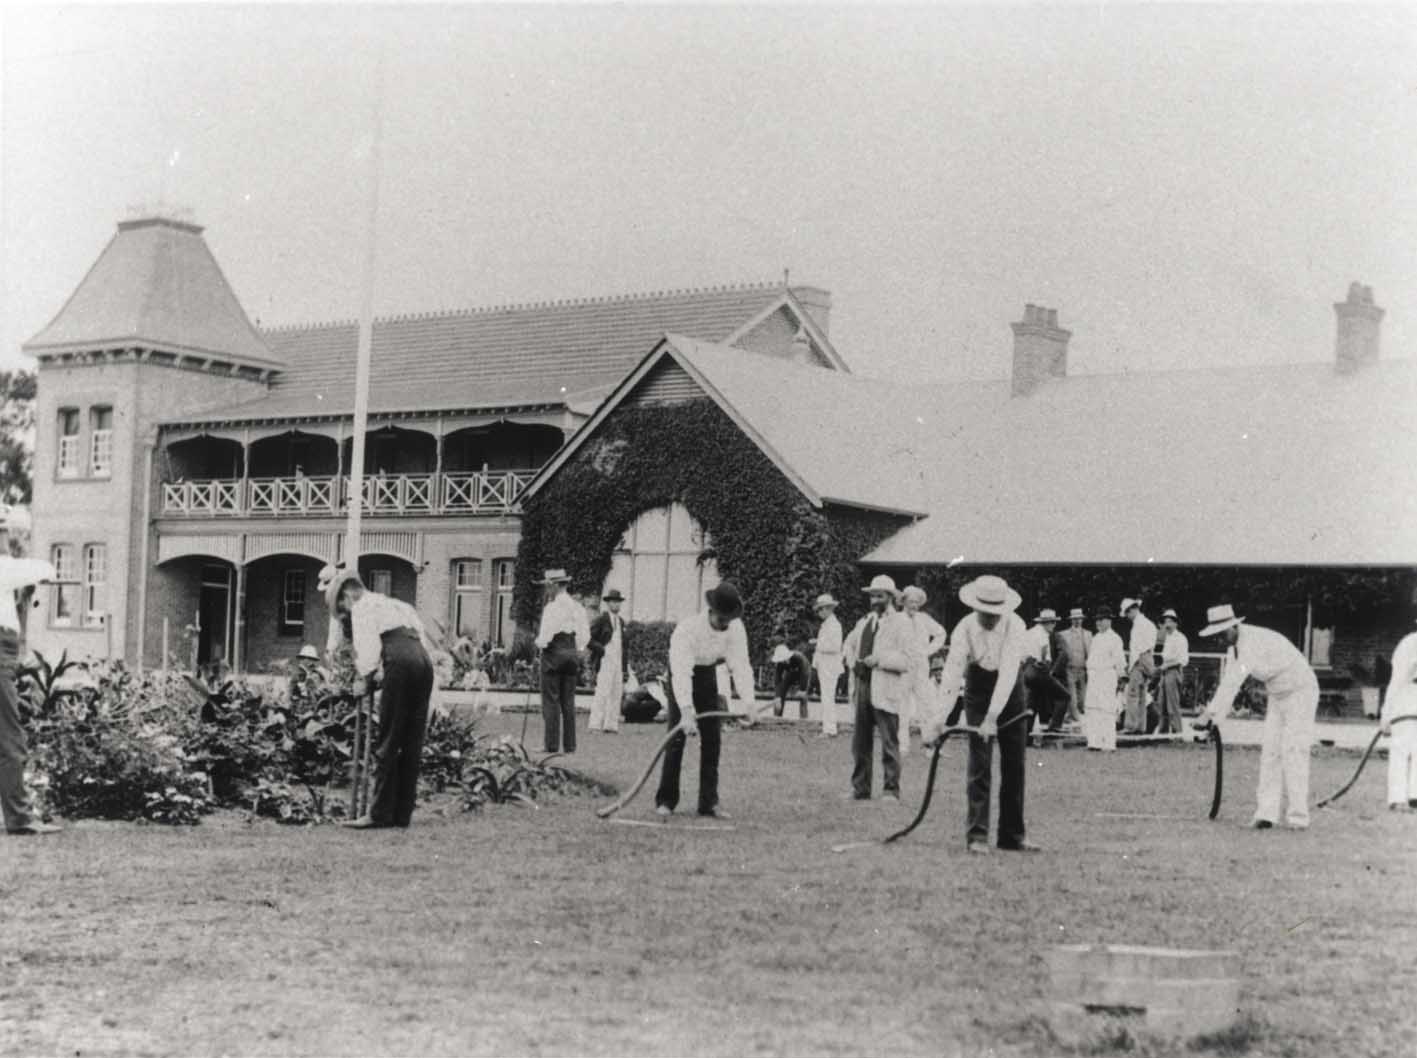 Students scything front lawn under instruction [Hawkesbury Agricultural College (HAC)]